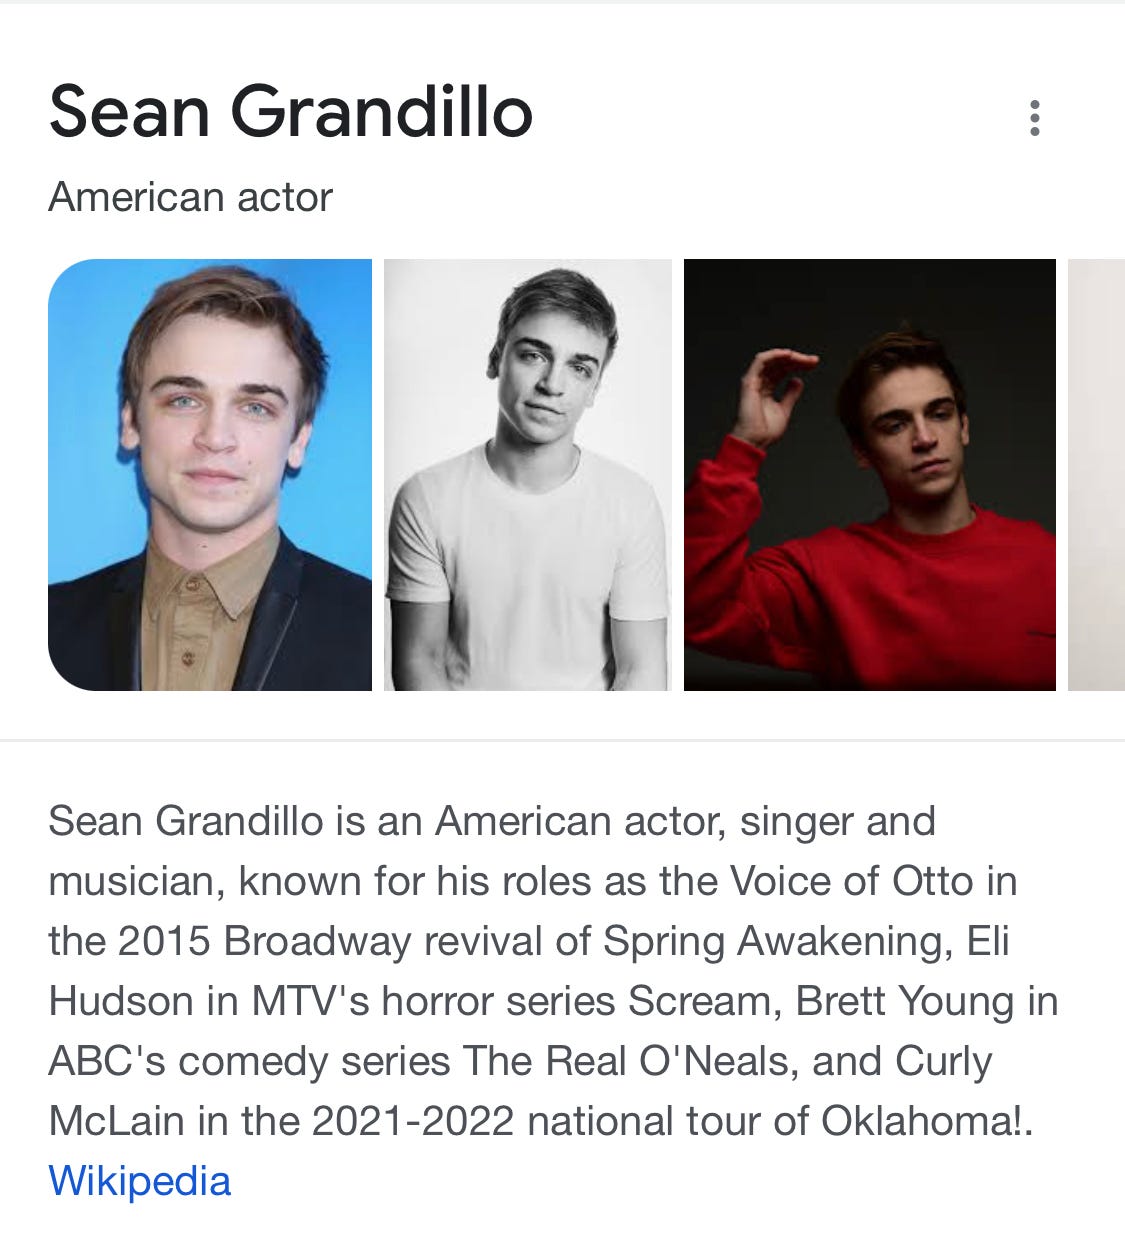 Screengrab of the Wikipedia page about American Actor Sean Grandillo with three photos of him and a short bio